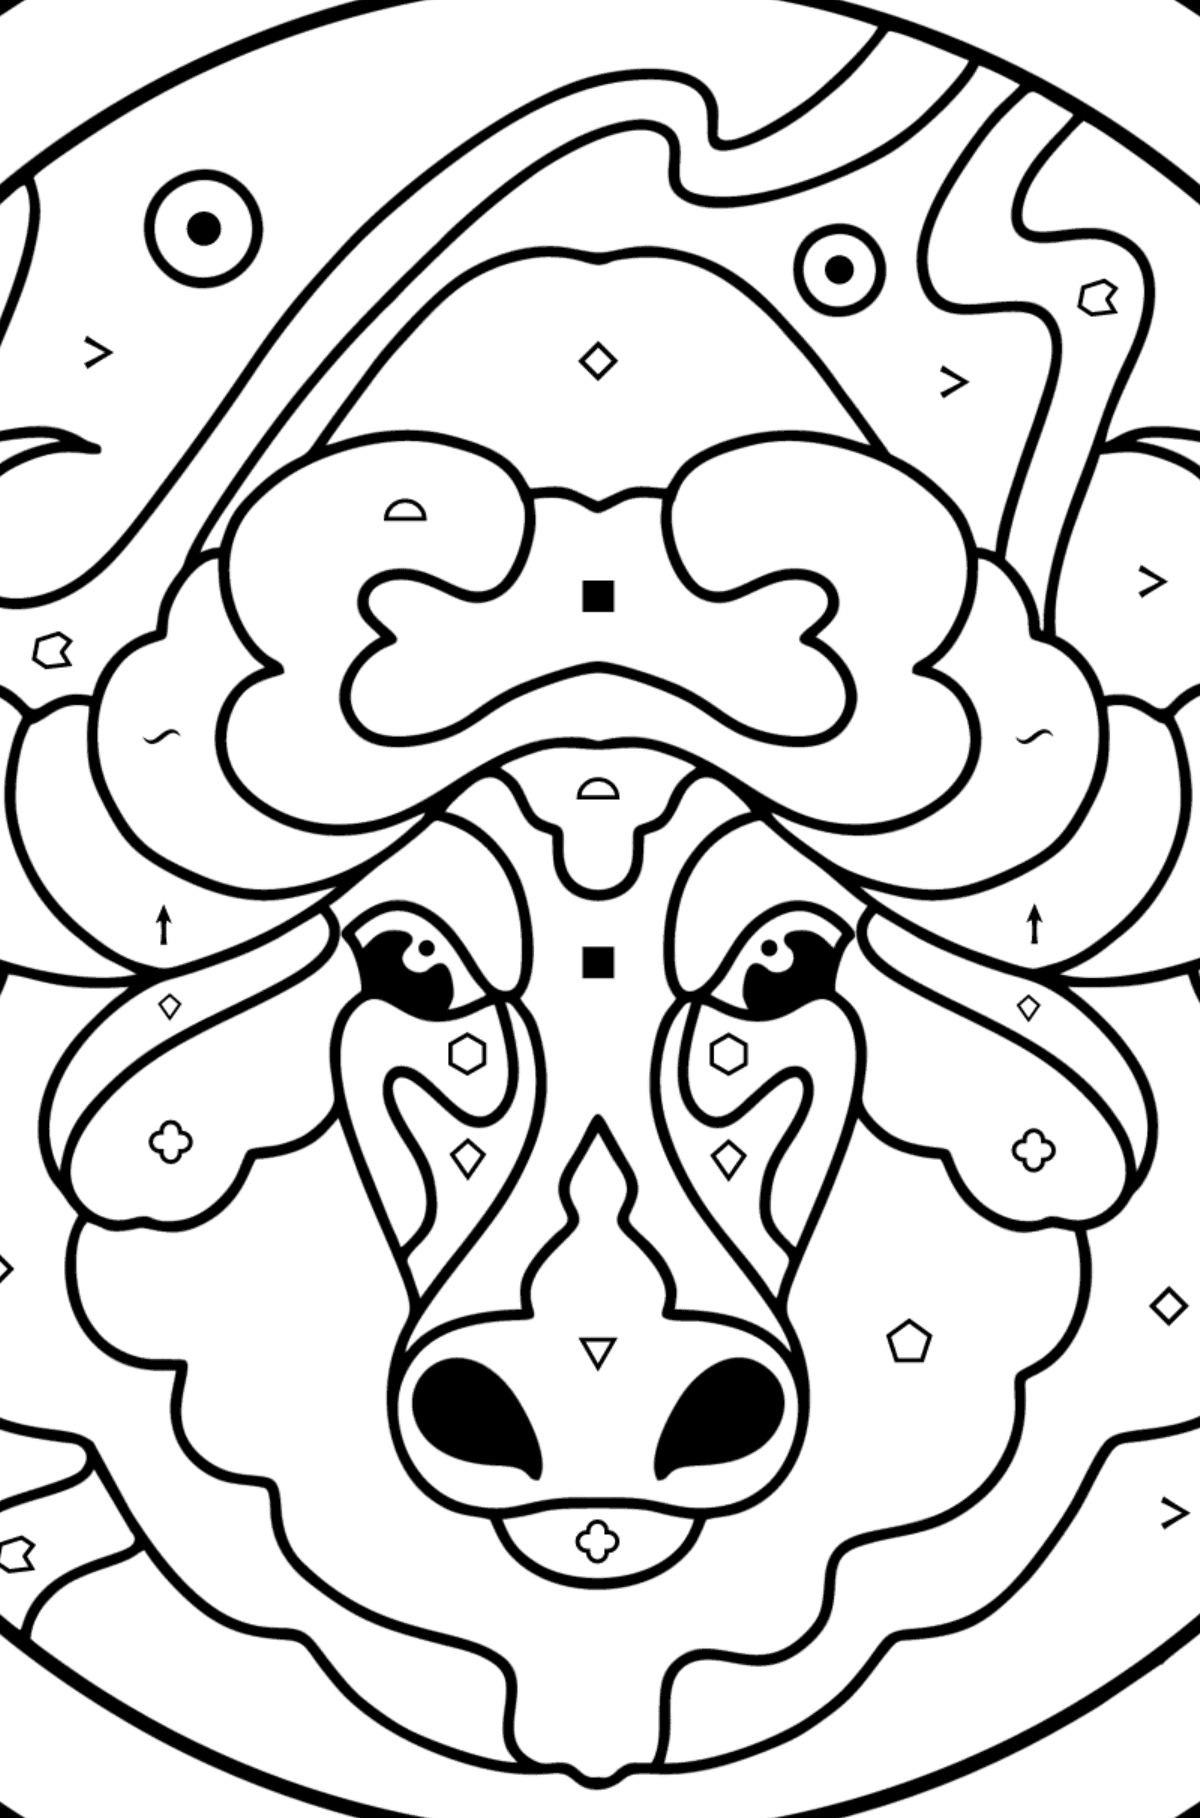 Coloring page for kids - zodiac sign Taurus - Coloring by Symbols and Geometric Shapes for Kids